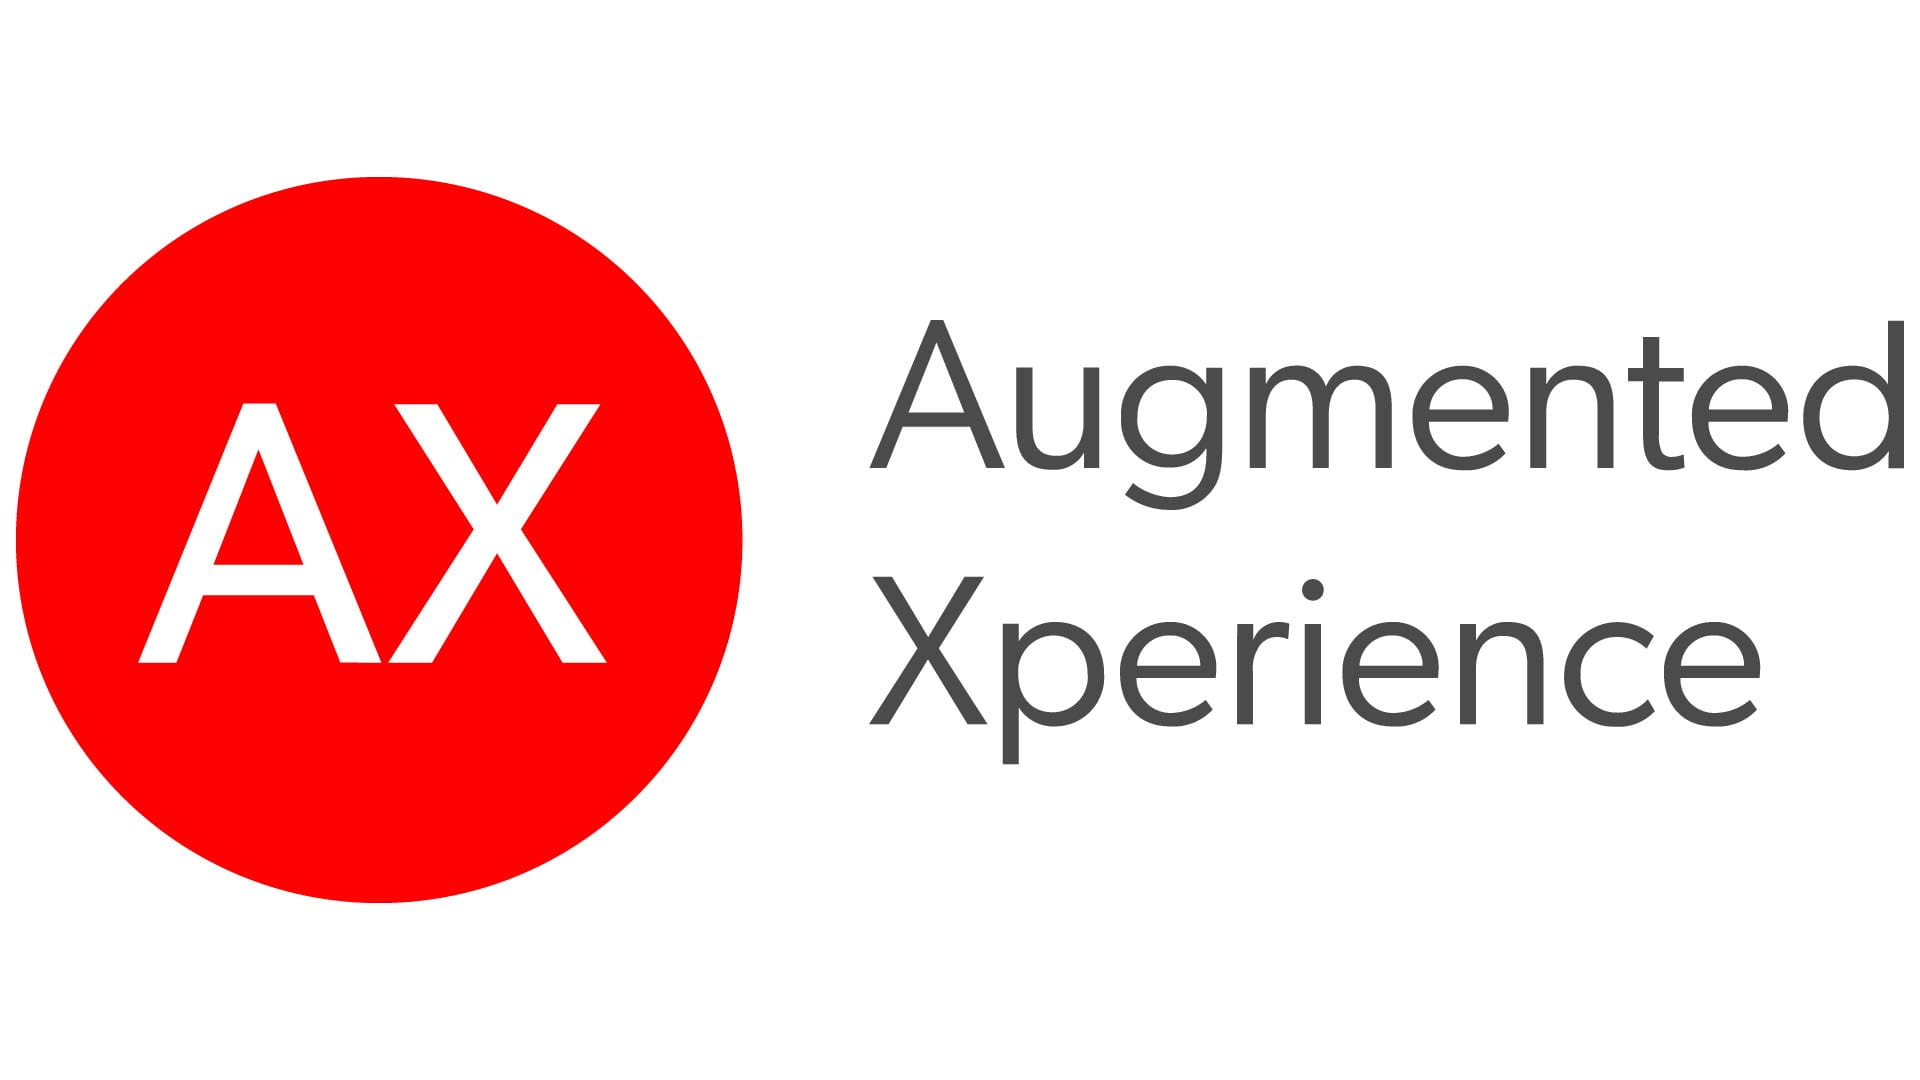 Augmented Xperience logo